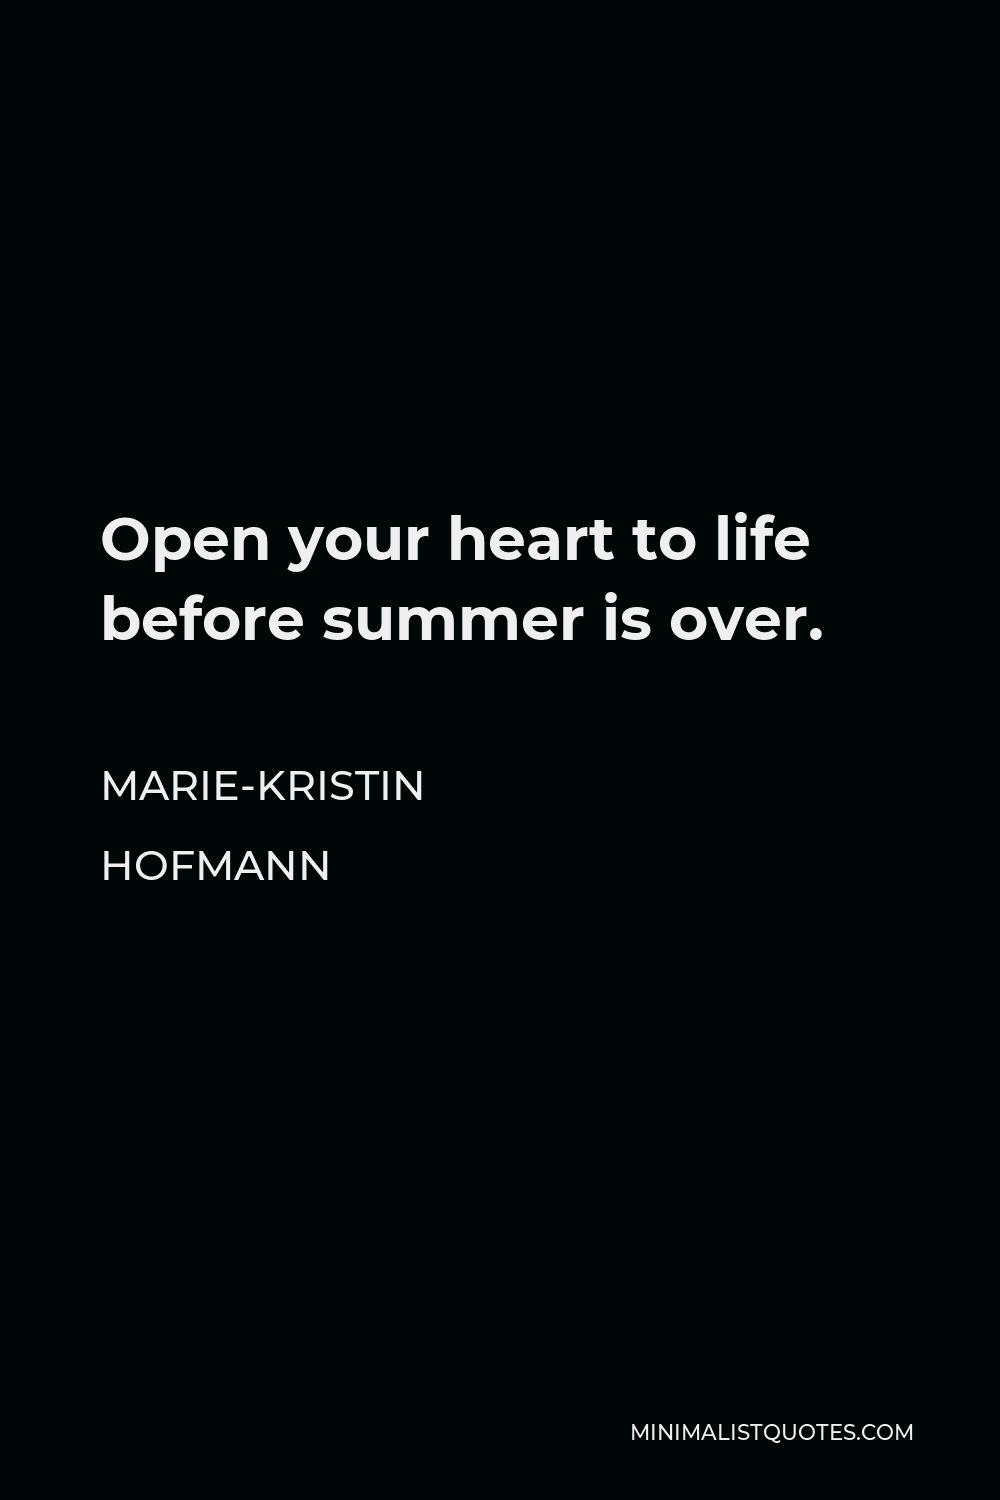 Marie-Kristin Hofmann Quote - Open your heart to life before summer is over.